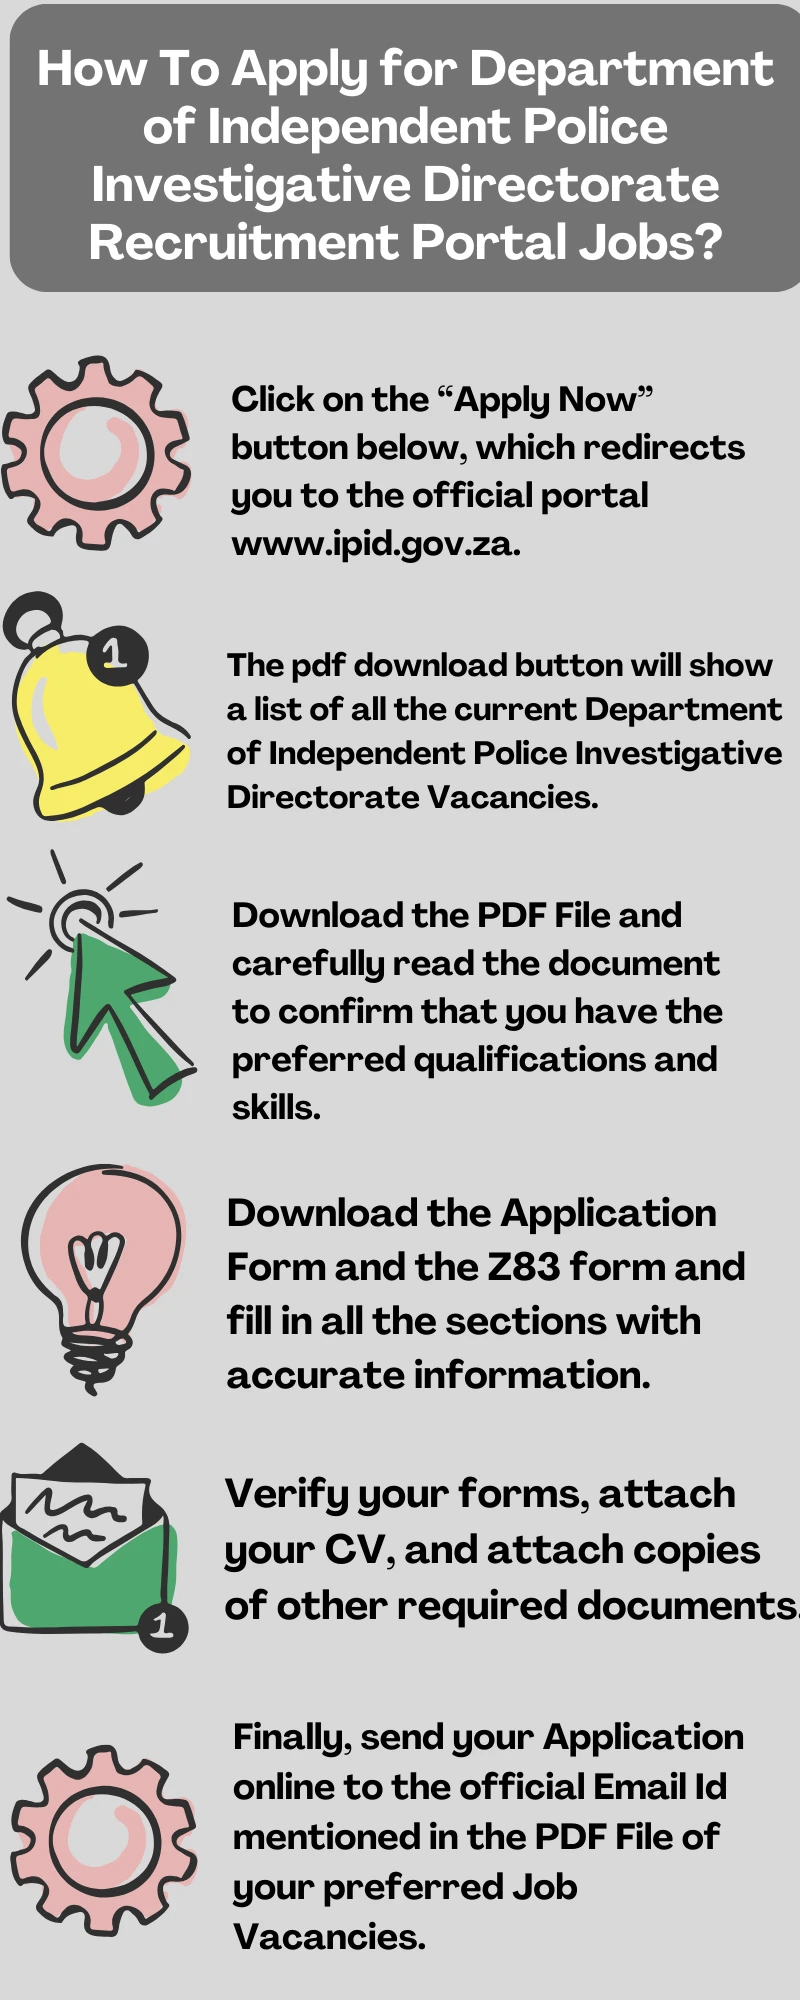 How To Apply for Department of Independent Police Investigative Directorate Recruitment Portal Jobs?